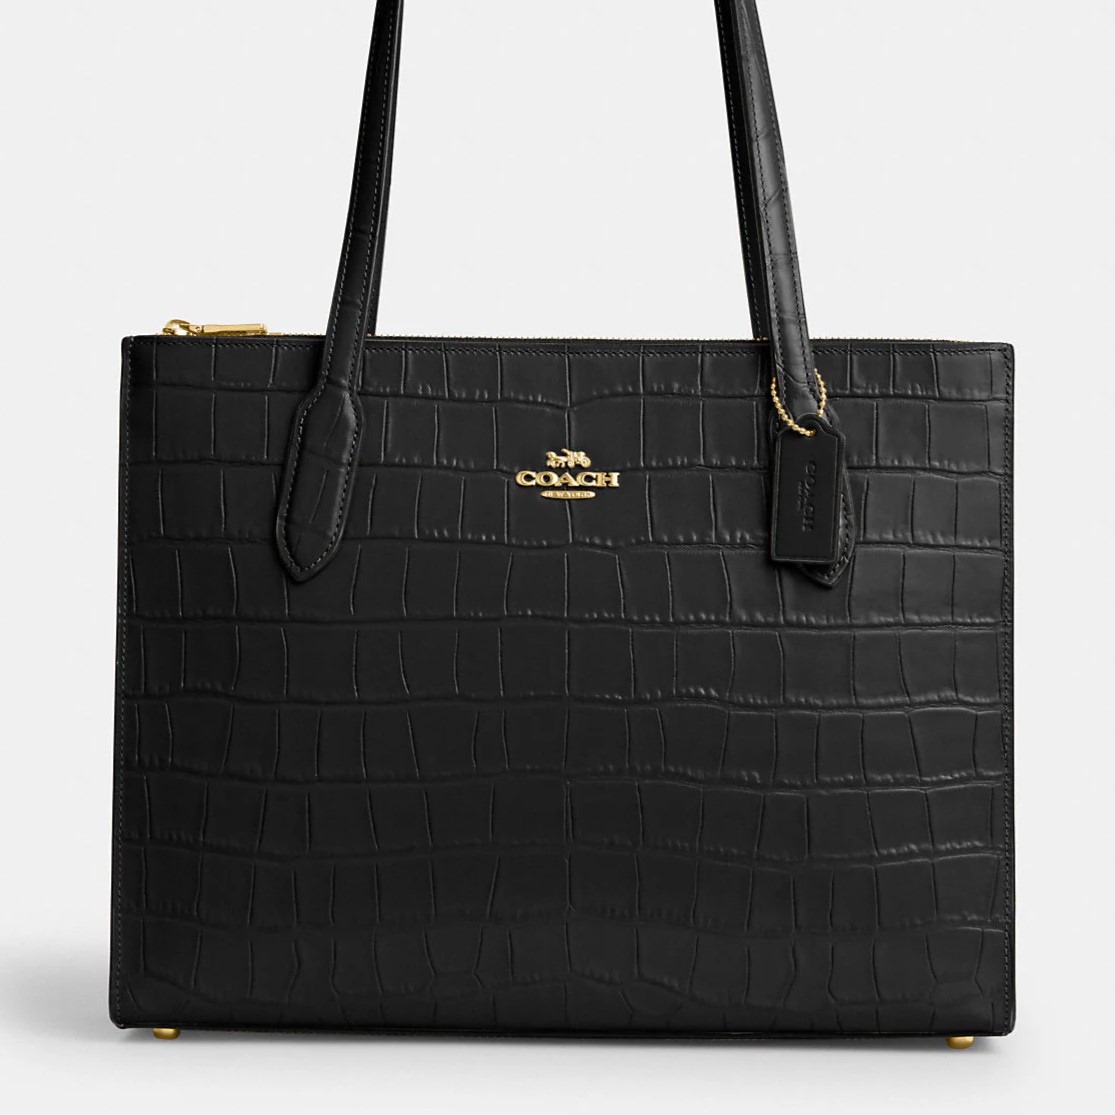 TÚI XÁCH COACH NỮ NINA TOTE CROCODILE-EMBOSSED LEATHER AND SMOOTH LEATHER BAG IN GOLD BLACK CL654 6